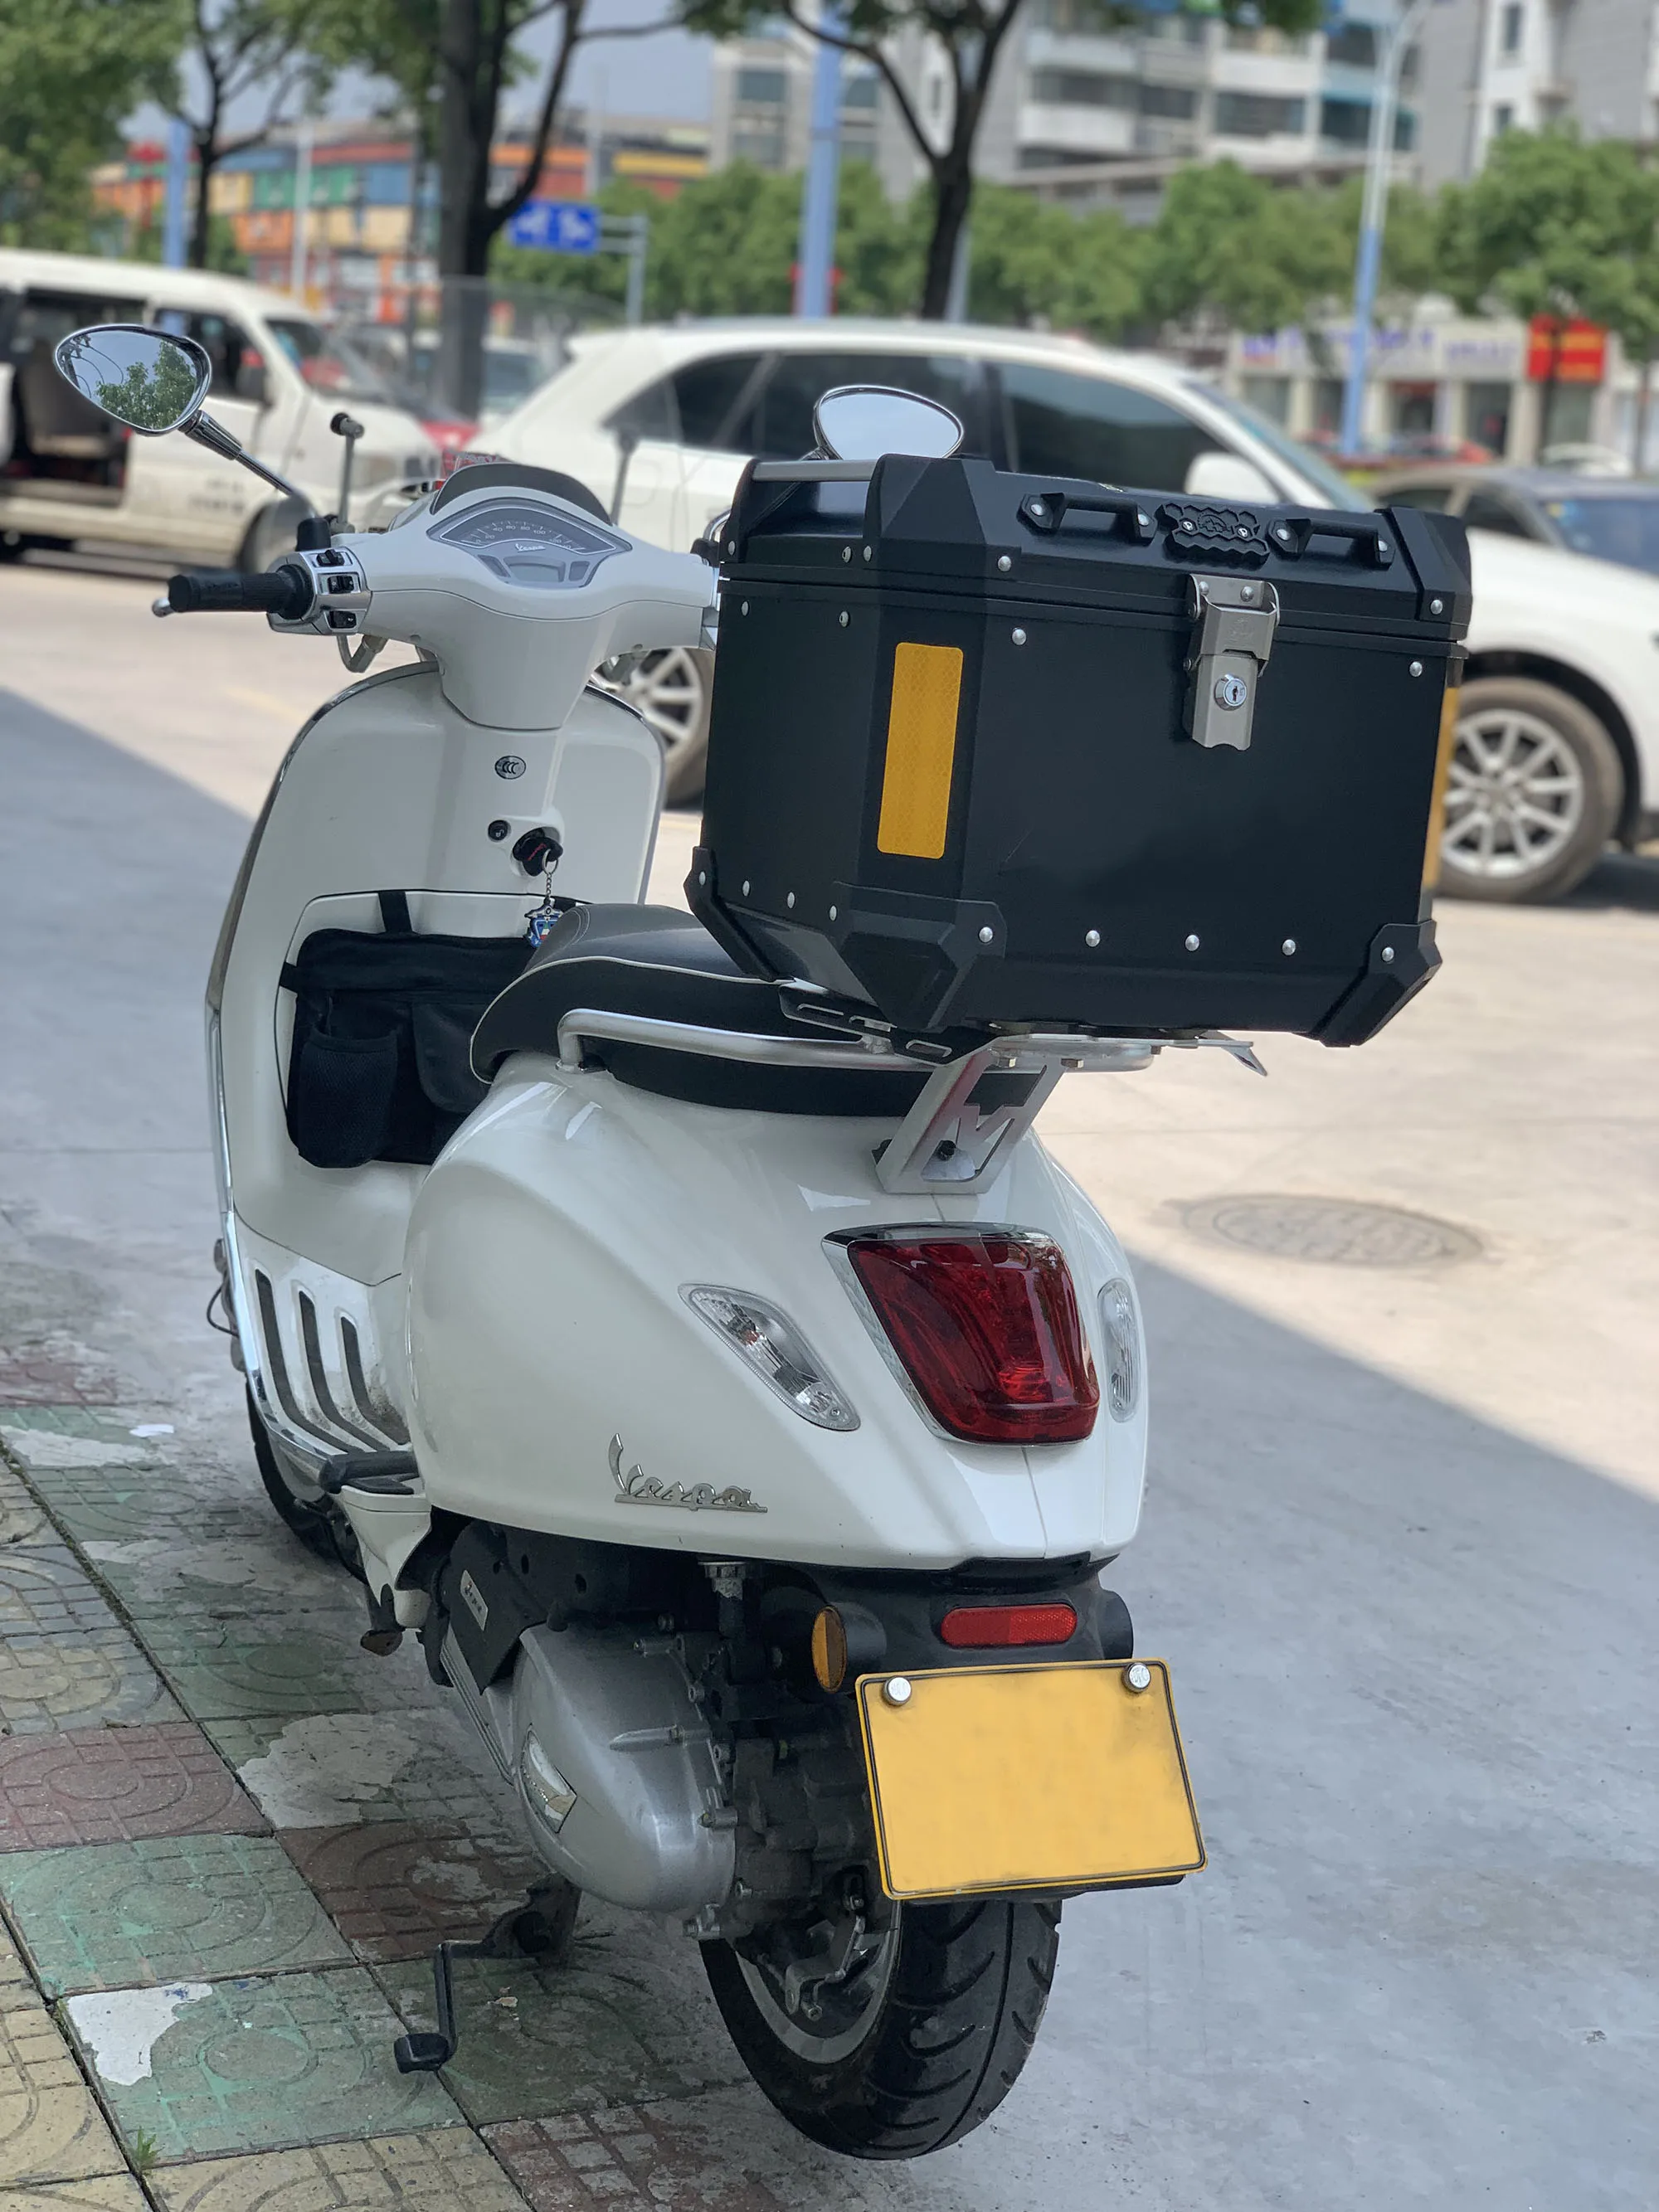 Buy 40l C3 Chengwei Aluminum Motorcycle Top Case Top Box With Quick-release  Structure from Jiangmen CW Motorcycle Supplies Co., Ltd., China